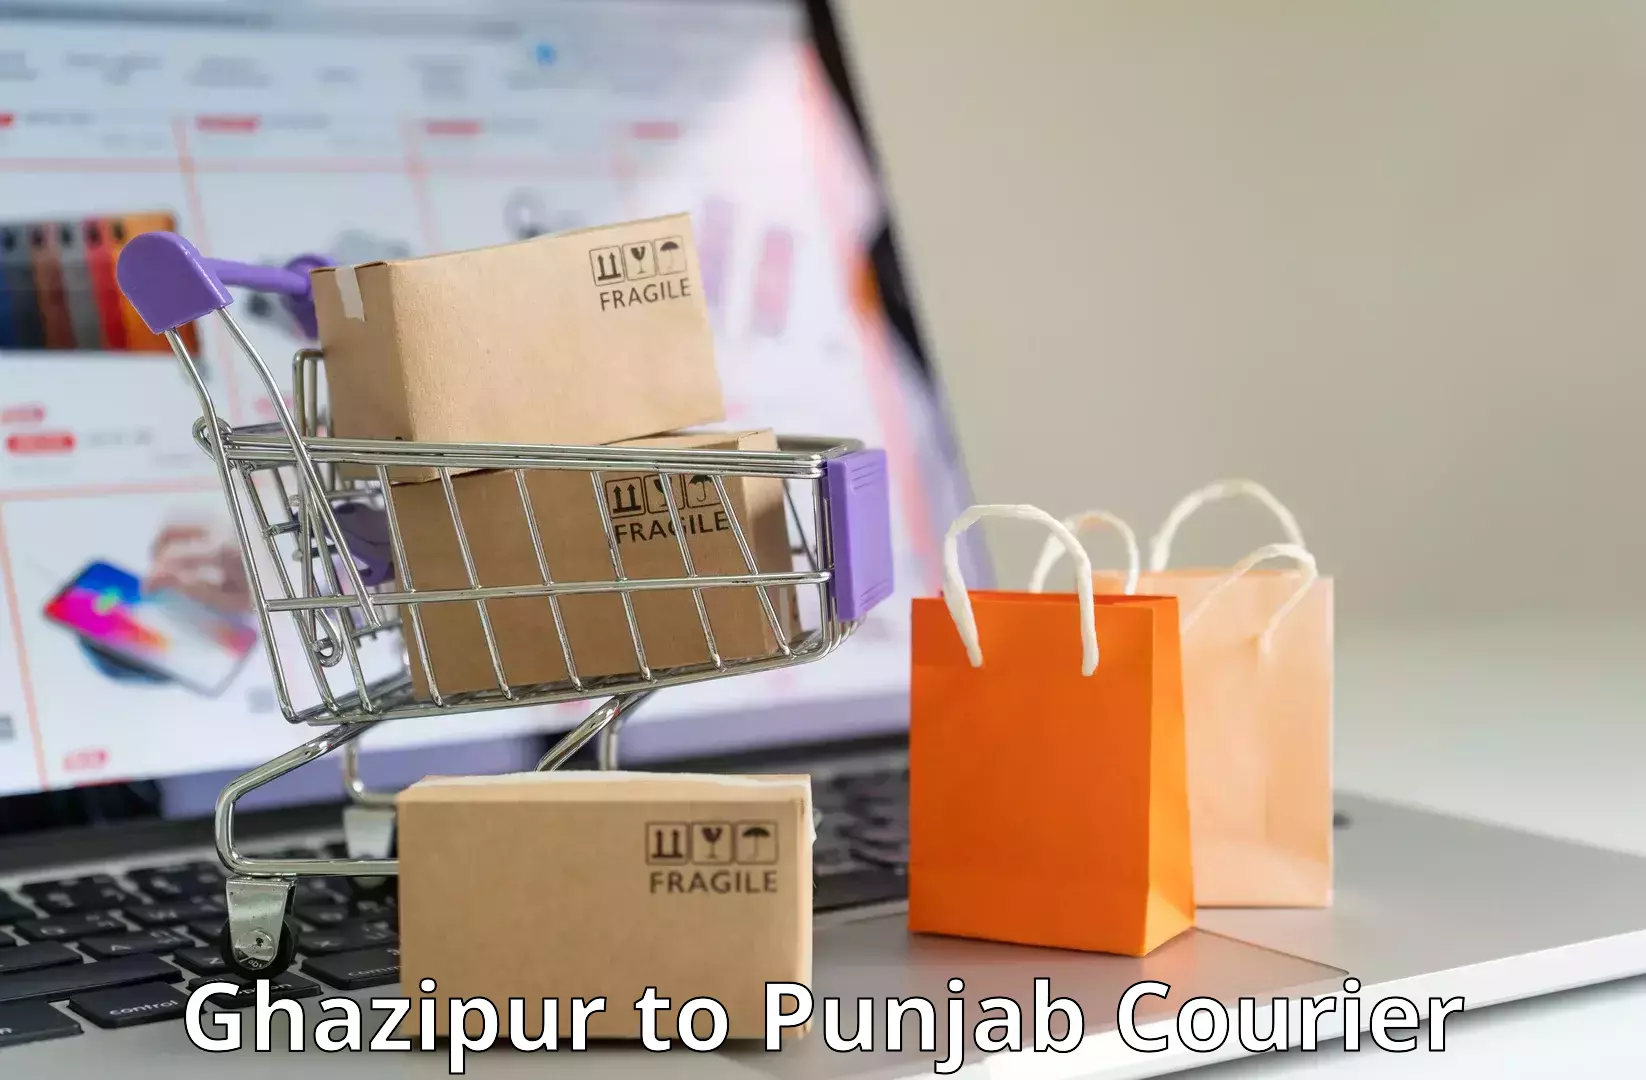 Affordable parcel service Ghazipur to Barnala